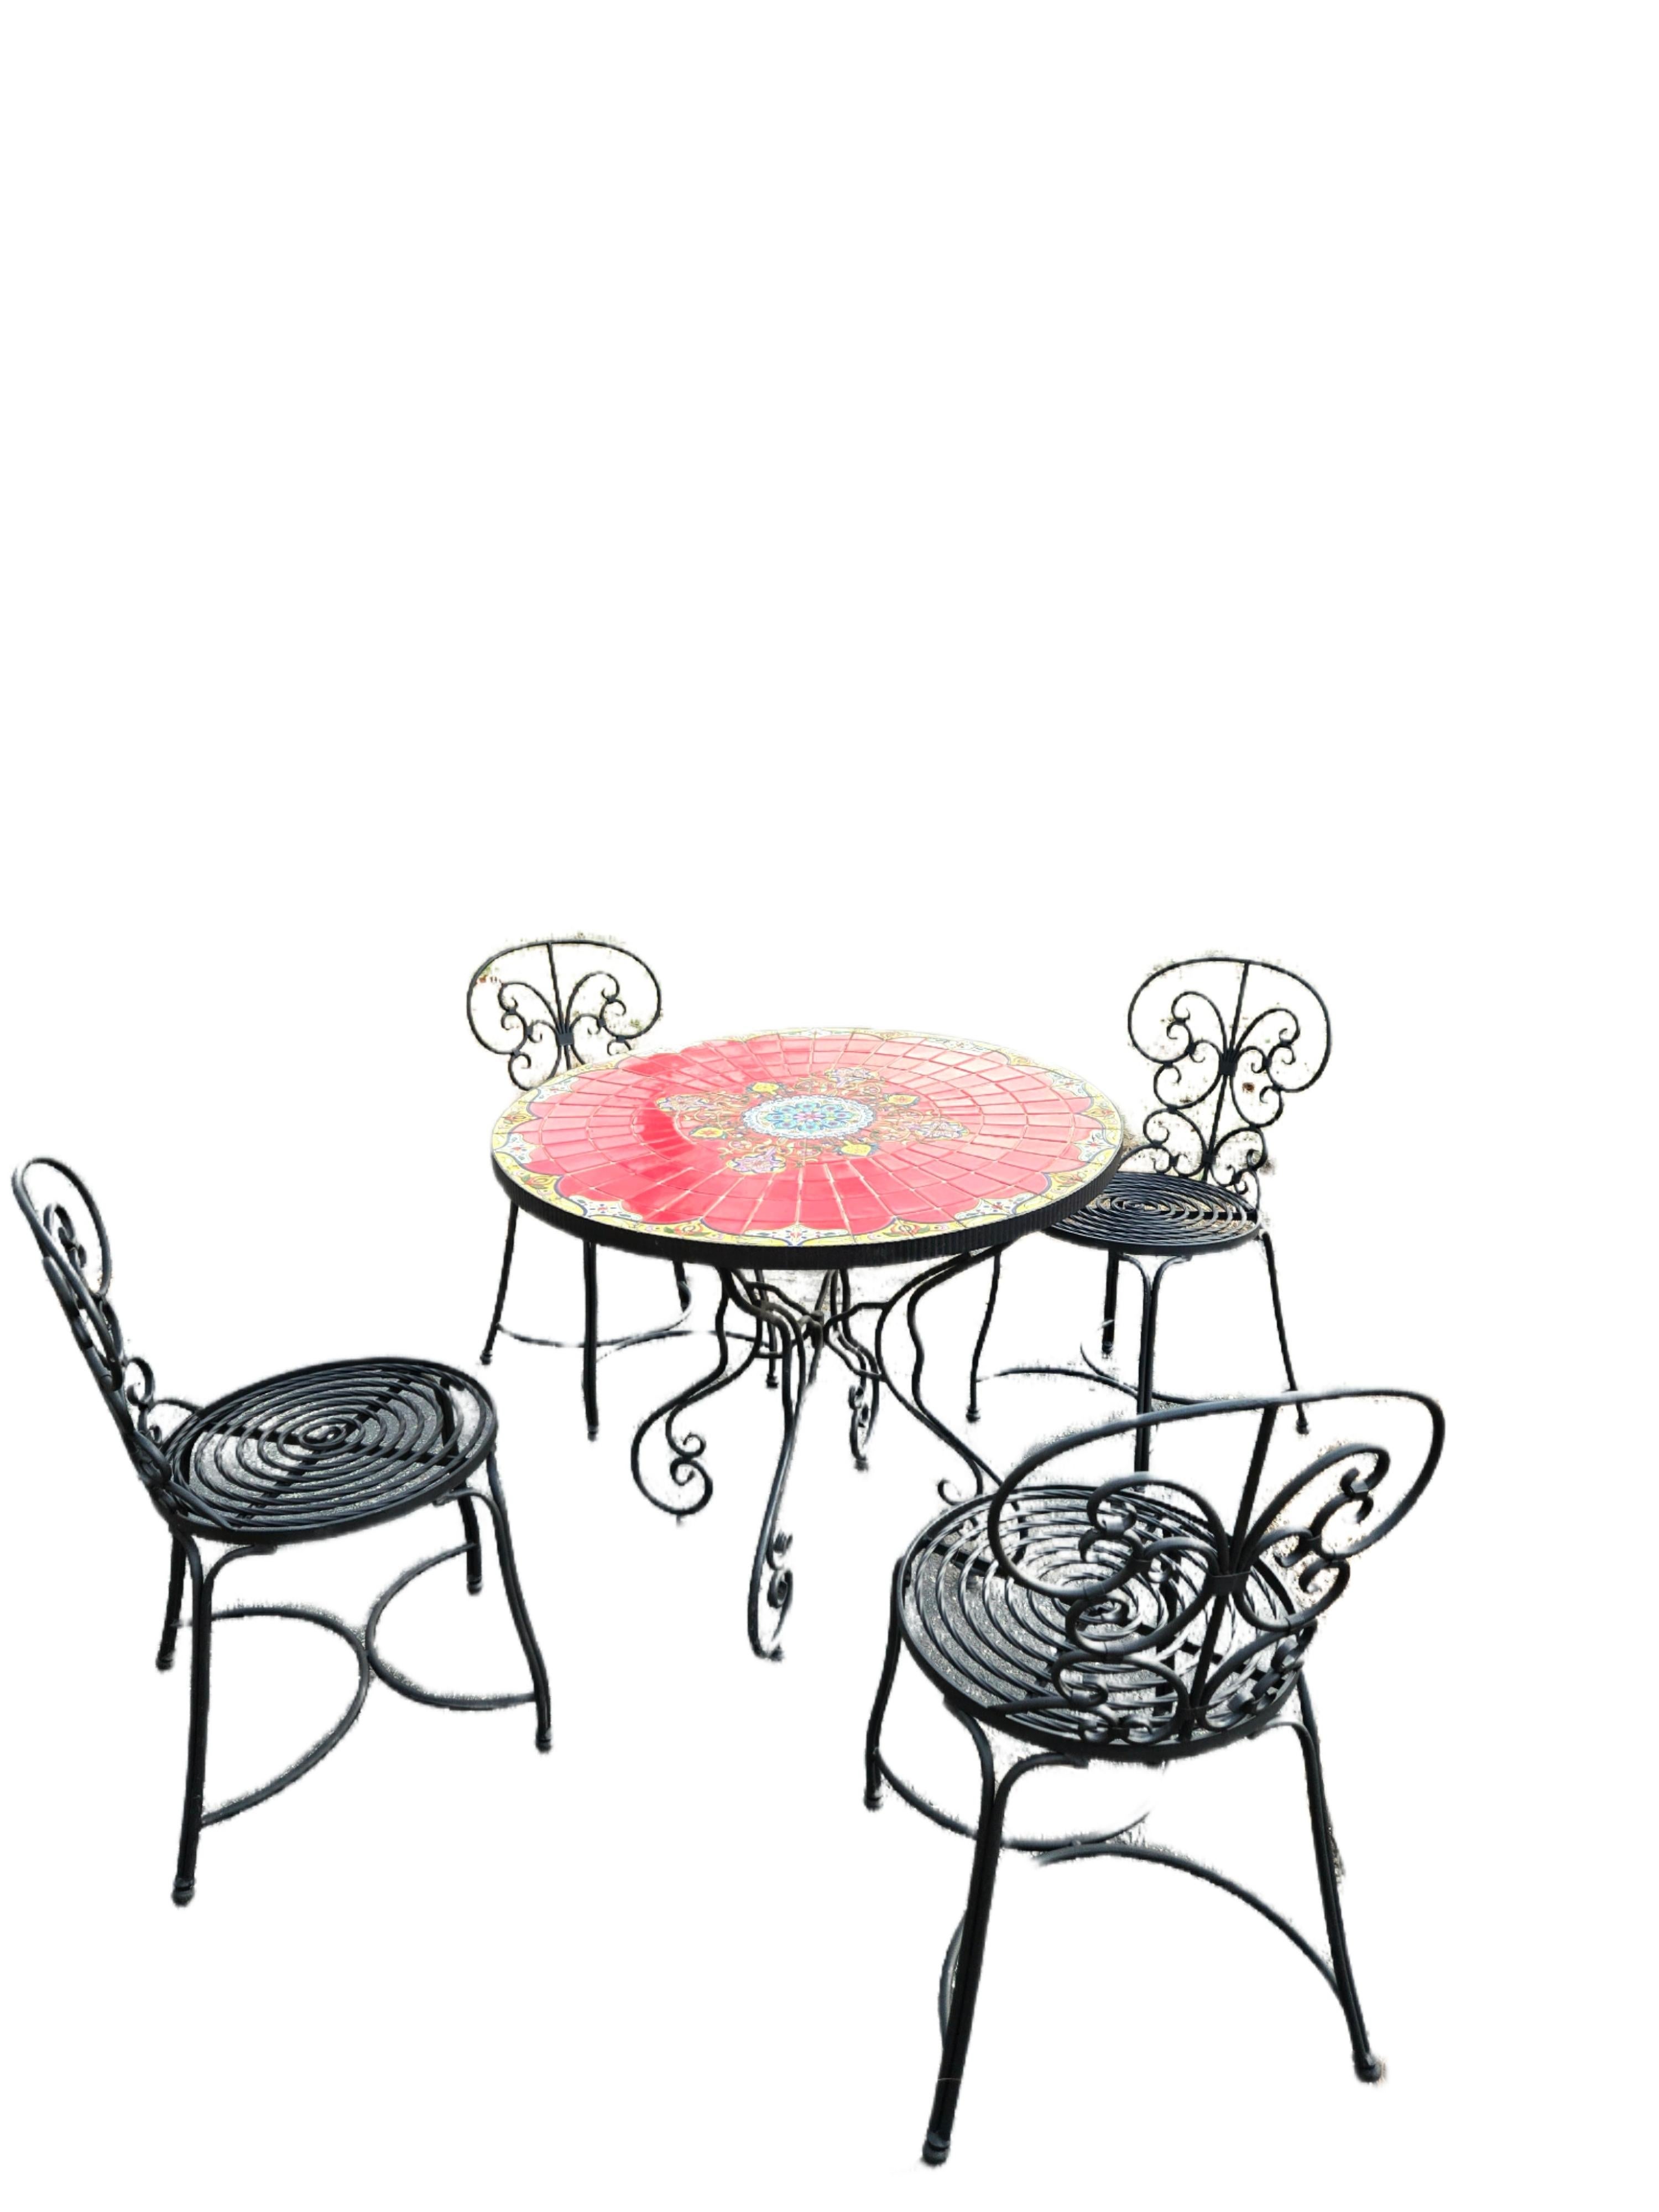 Vintage Morracan Ceramic Tile Table and 4 Chairs available now and ready to ship.

This amazing arrangement of 4 scrolled back Wrought Iron Bistro Chairs and Cermaic Tiled Table is perfect for any deck, garden, or terrace. Enjoy this full size